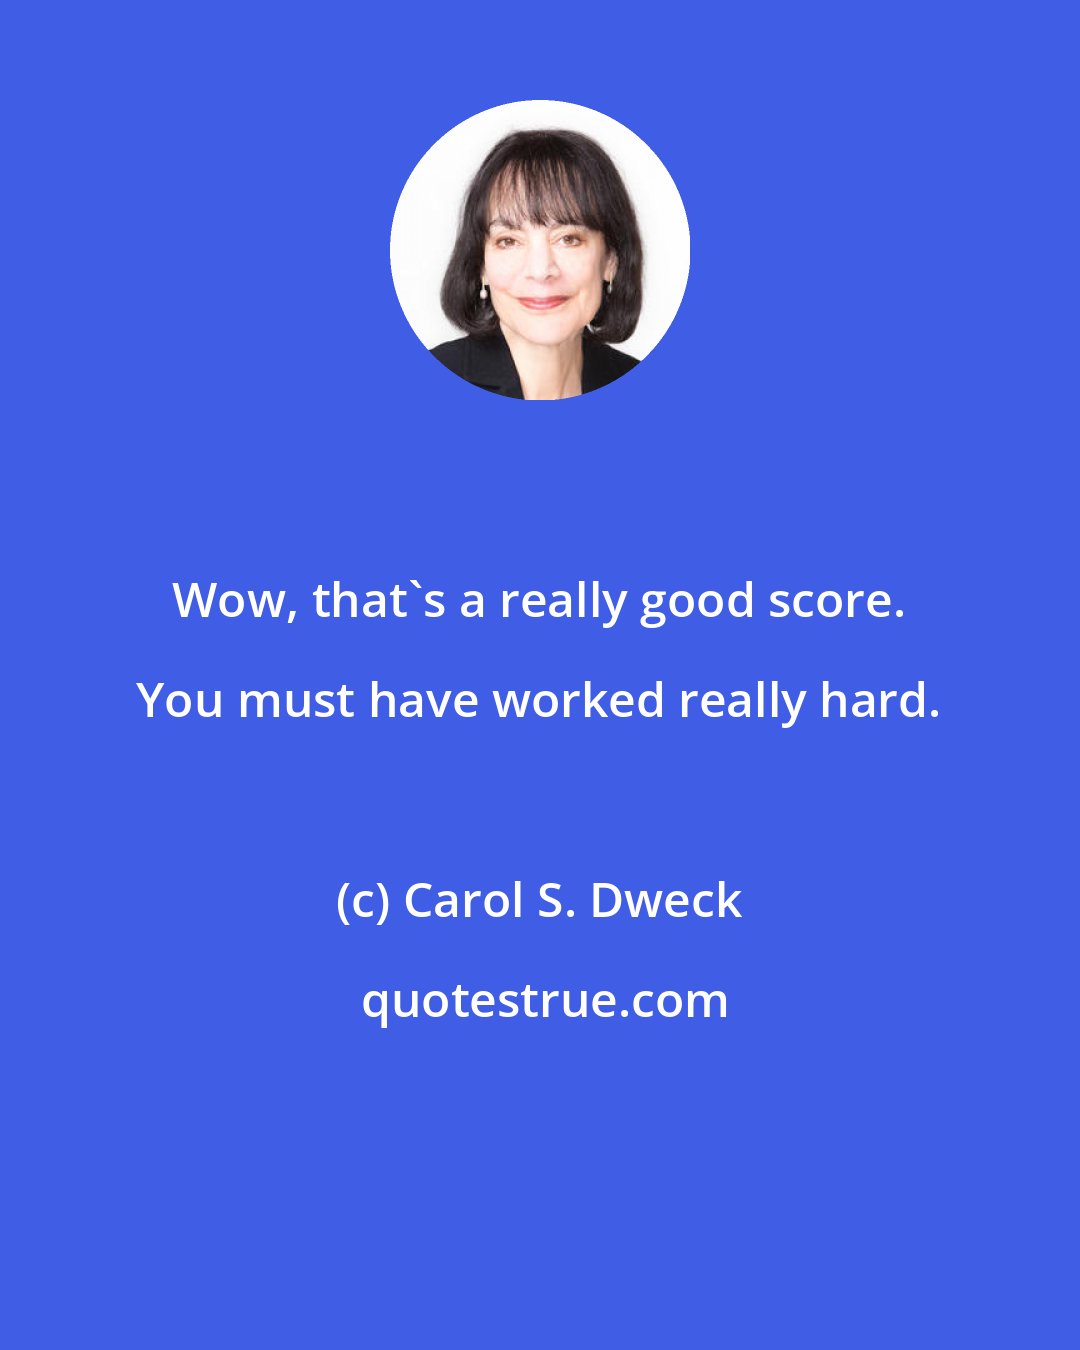 Carol S. Dweck: Wow, that's a really good score. You must have worked really hard.